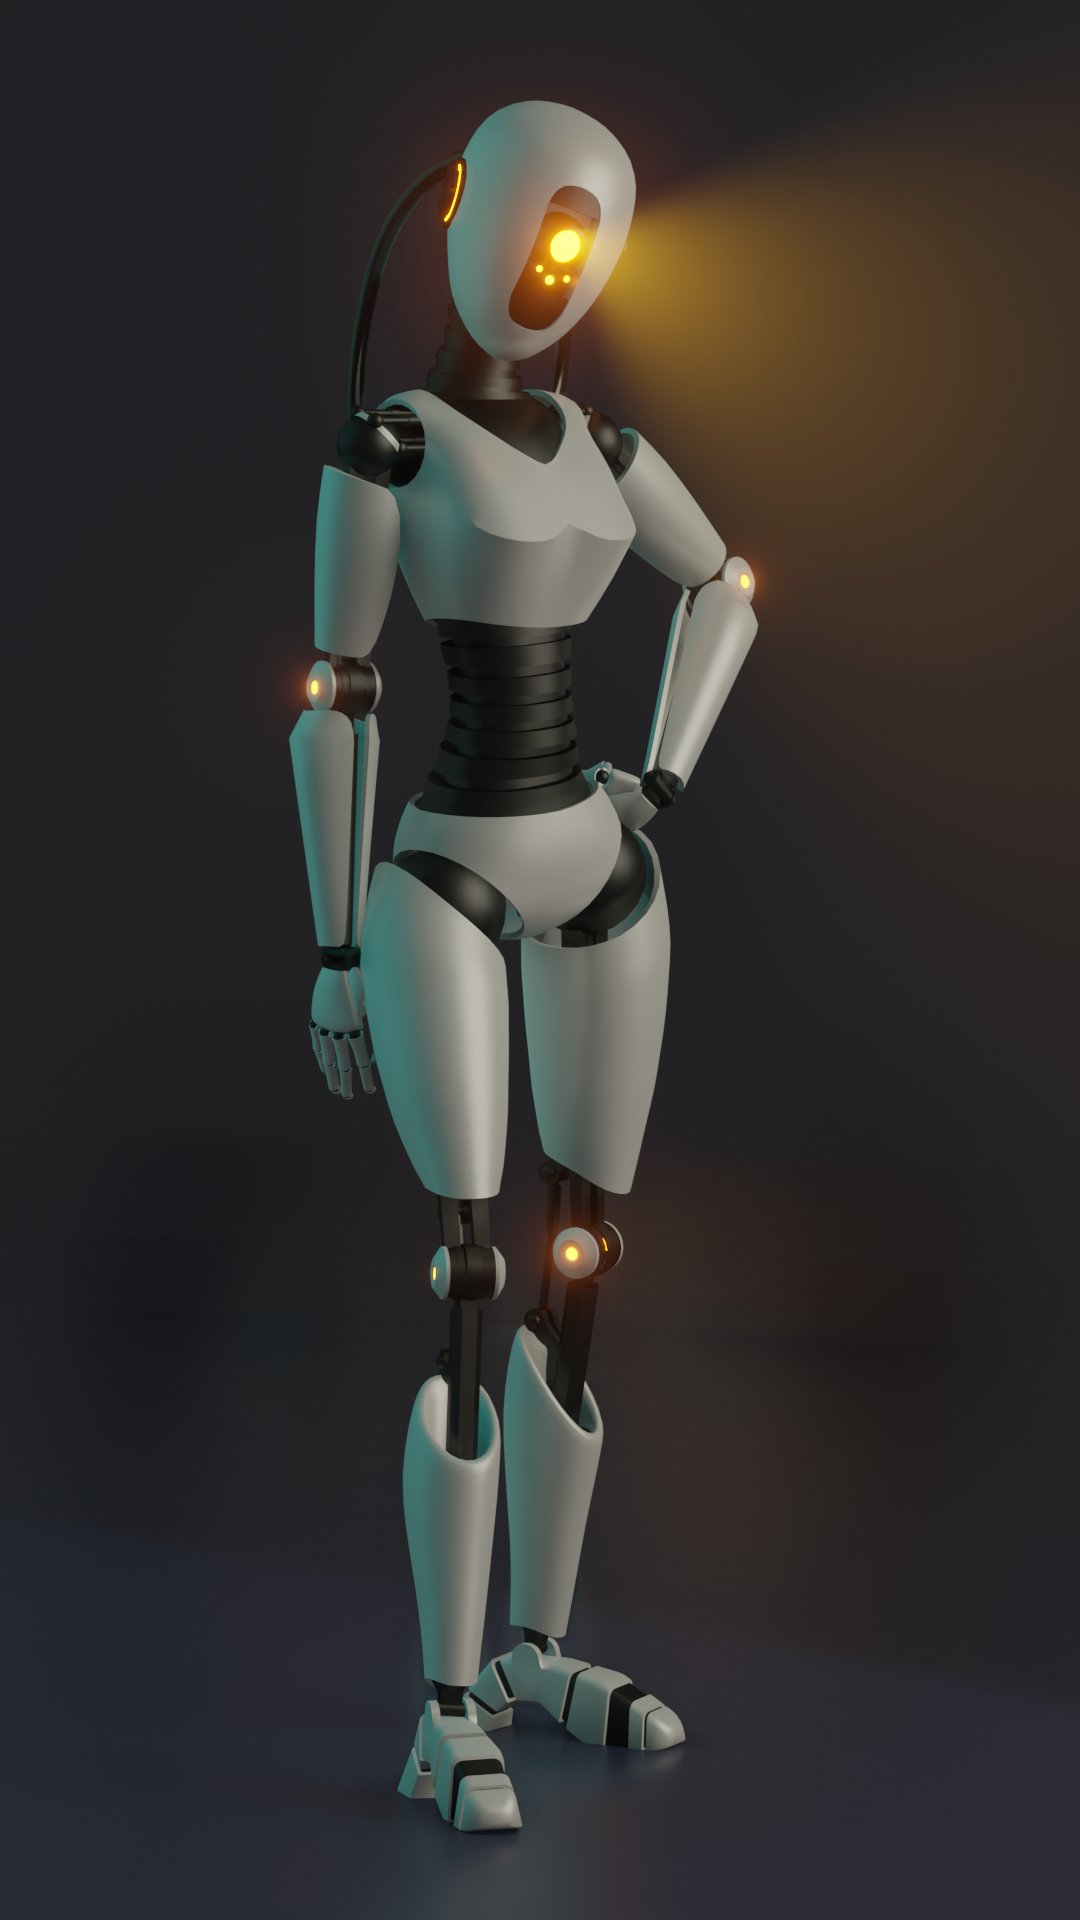 Polo Creación nitrógeno Cascadian on Twitter: "Finished a robot I started making a while back for  #VRChat! Not much, but mostly wanted to finish what I had started. Looking  forward to making another one here